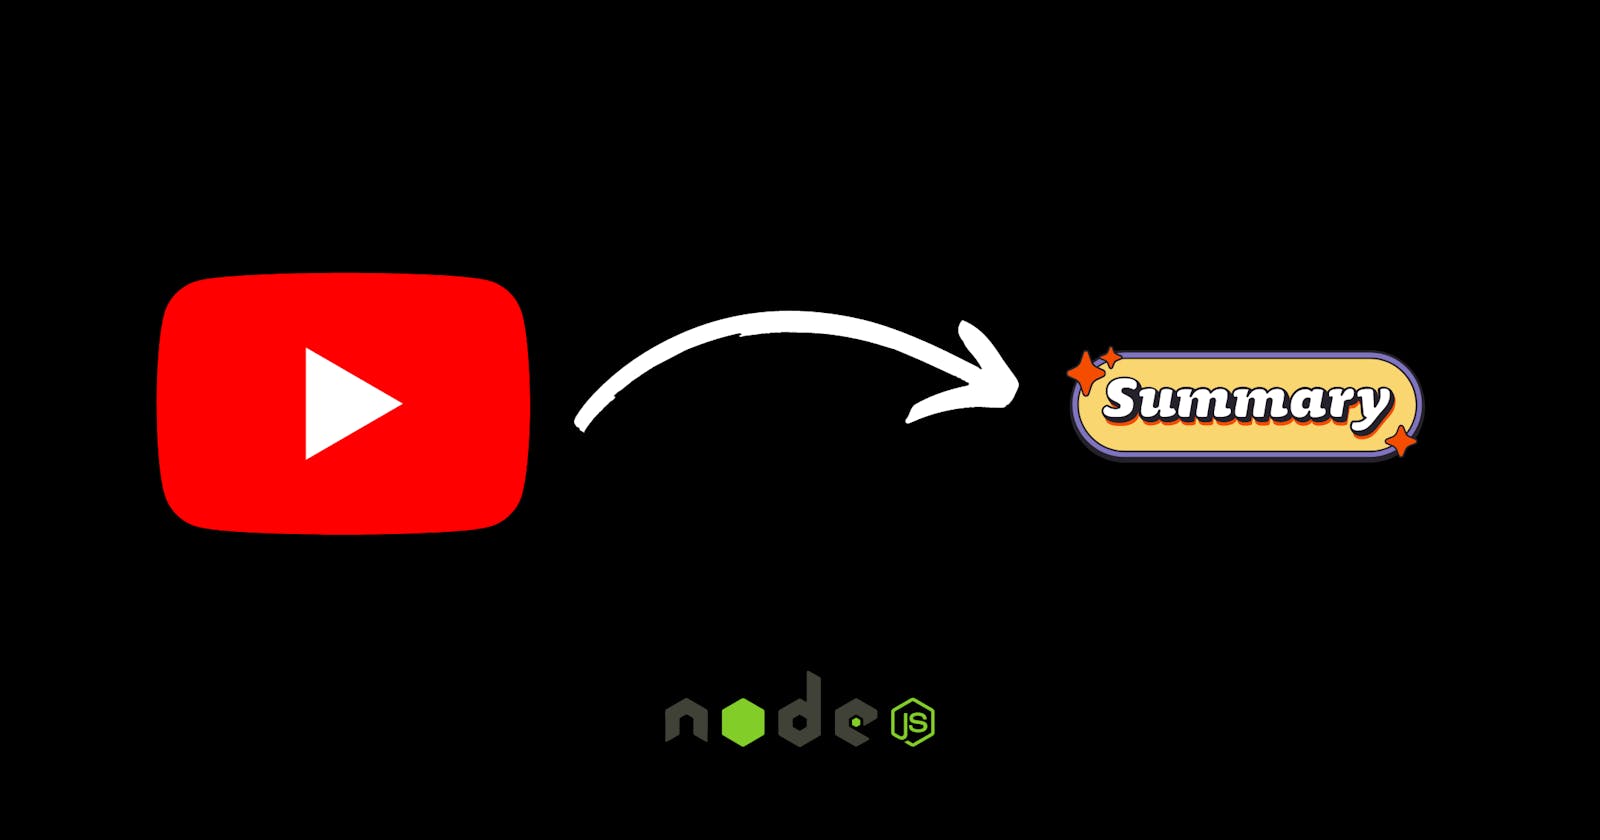 Using Node Js, Chat GPT API, and Whisper API to Generate a Summary of a YouTube Video